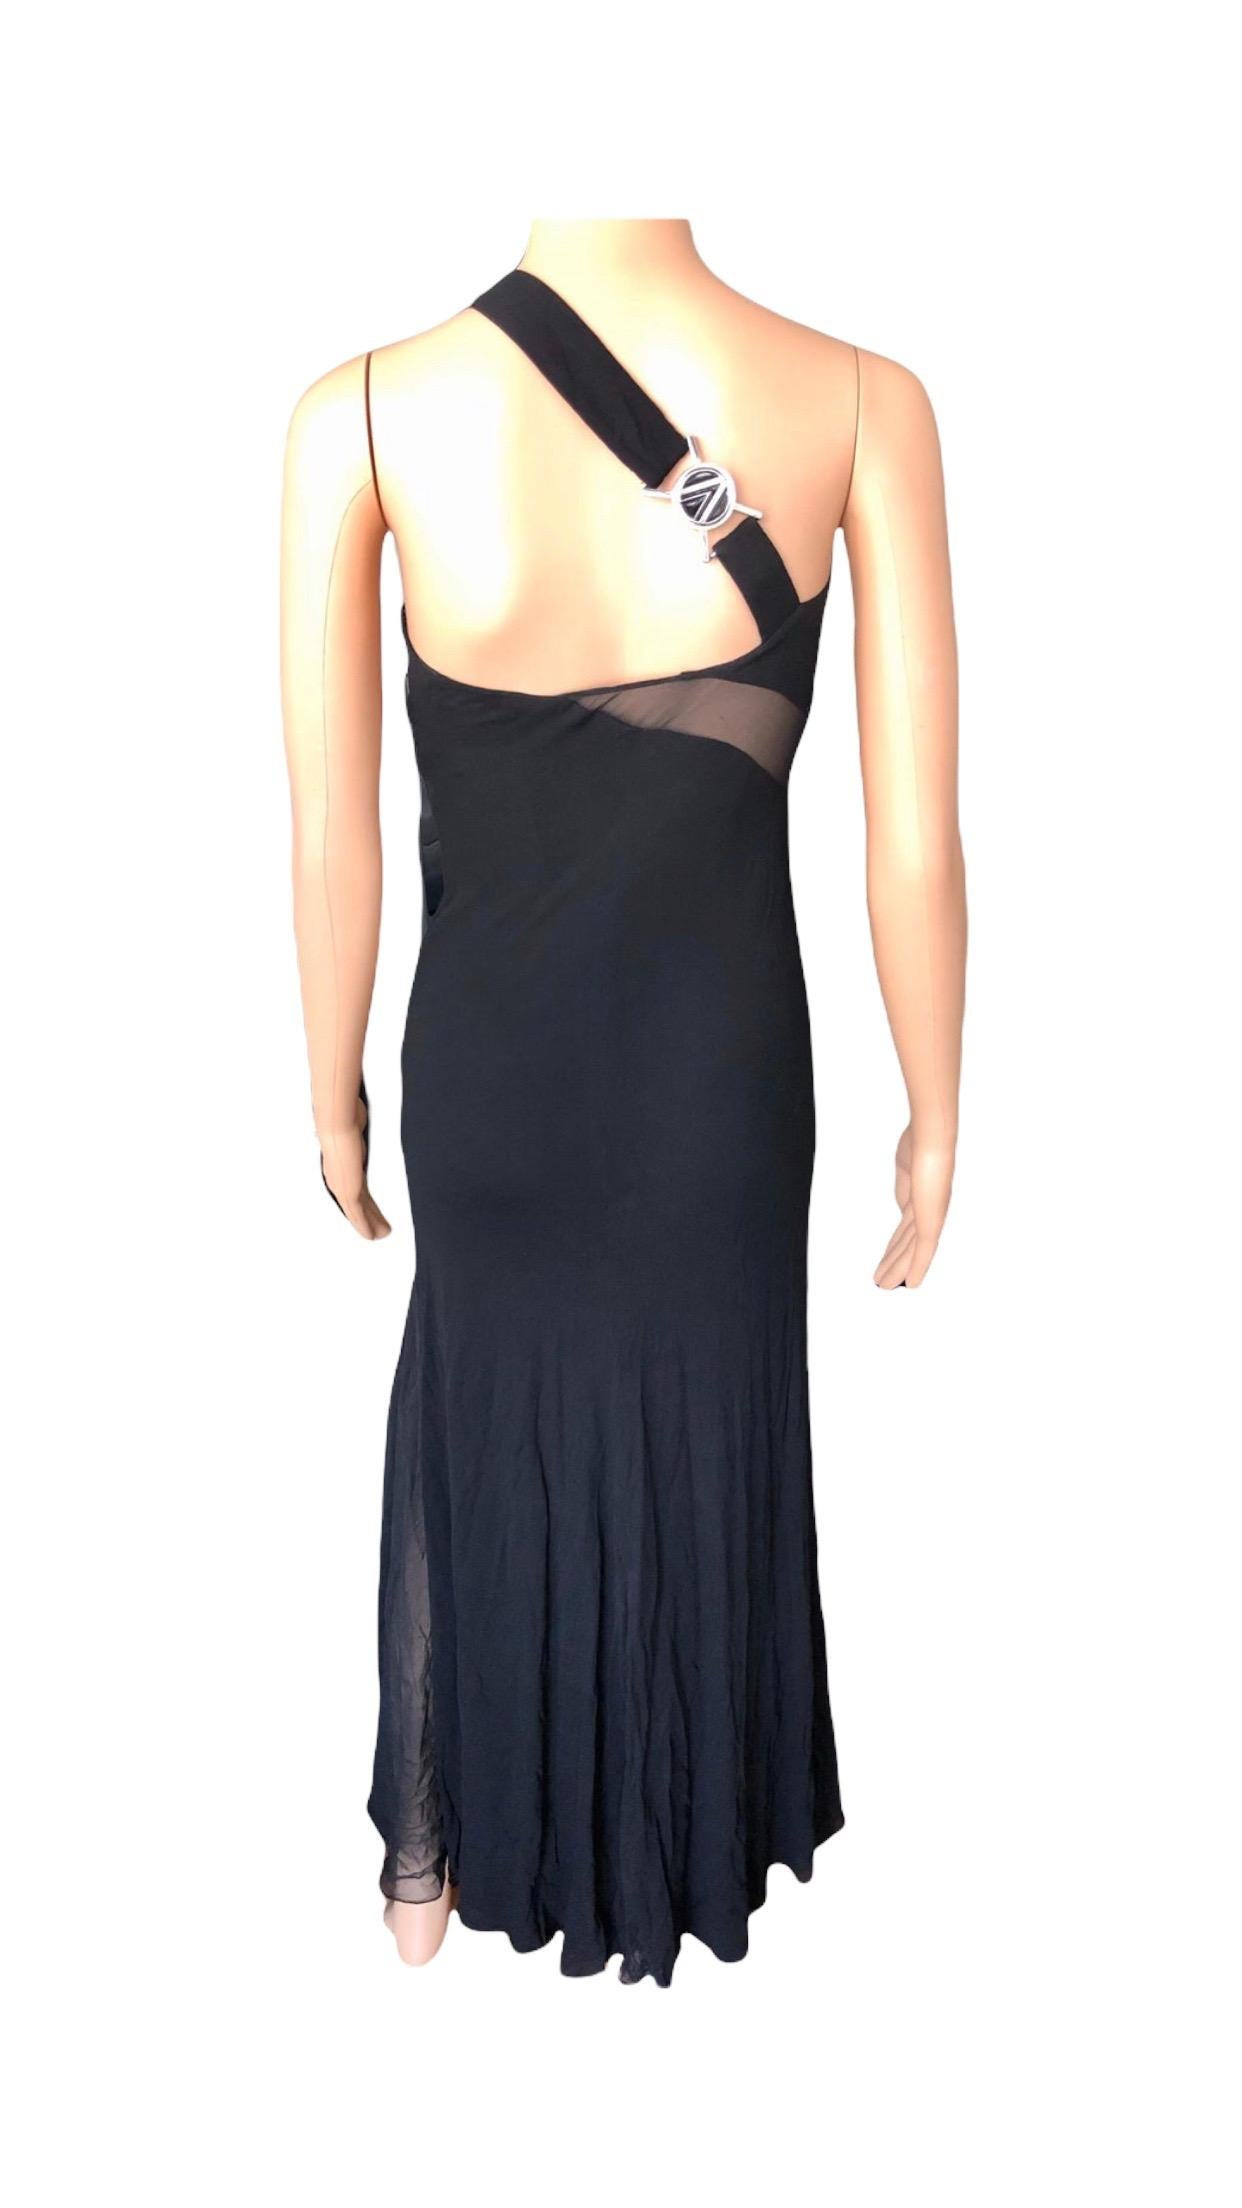 Versace Sheer Cutout Panel Black Evening Dress Gown For Sale 4